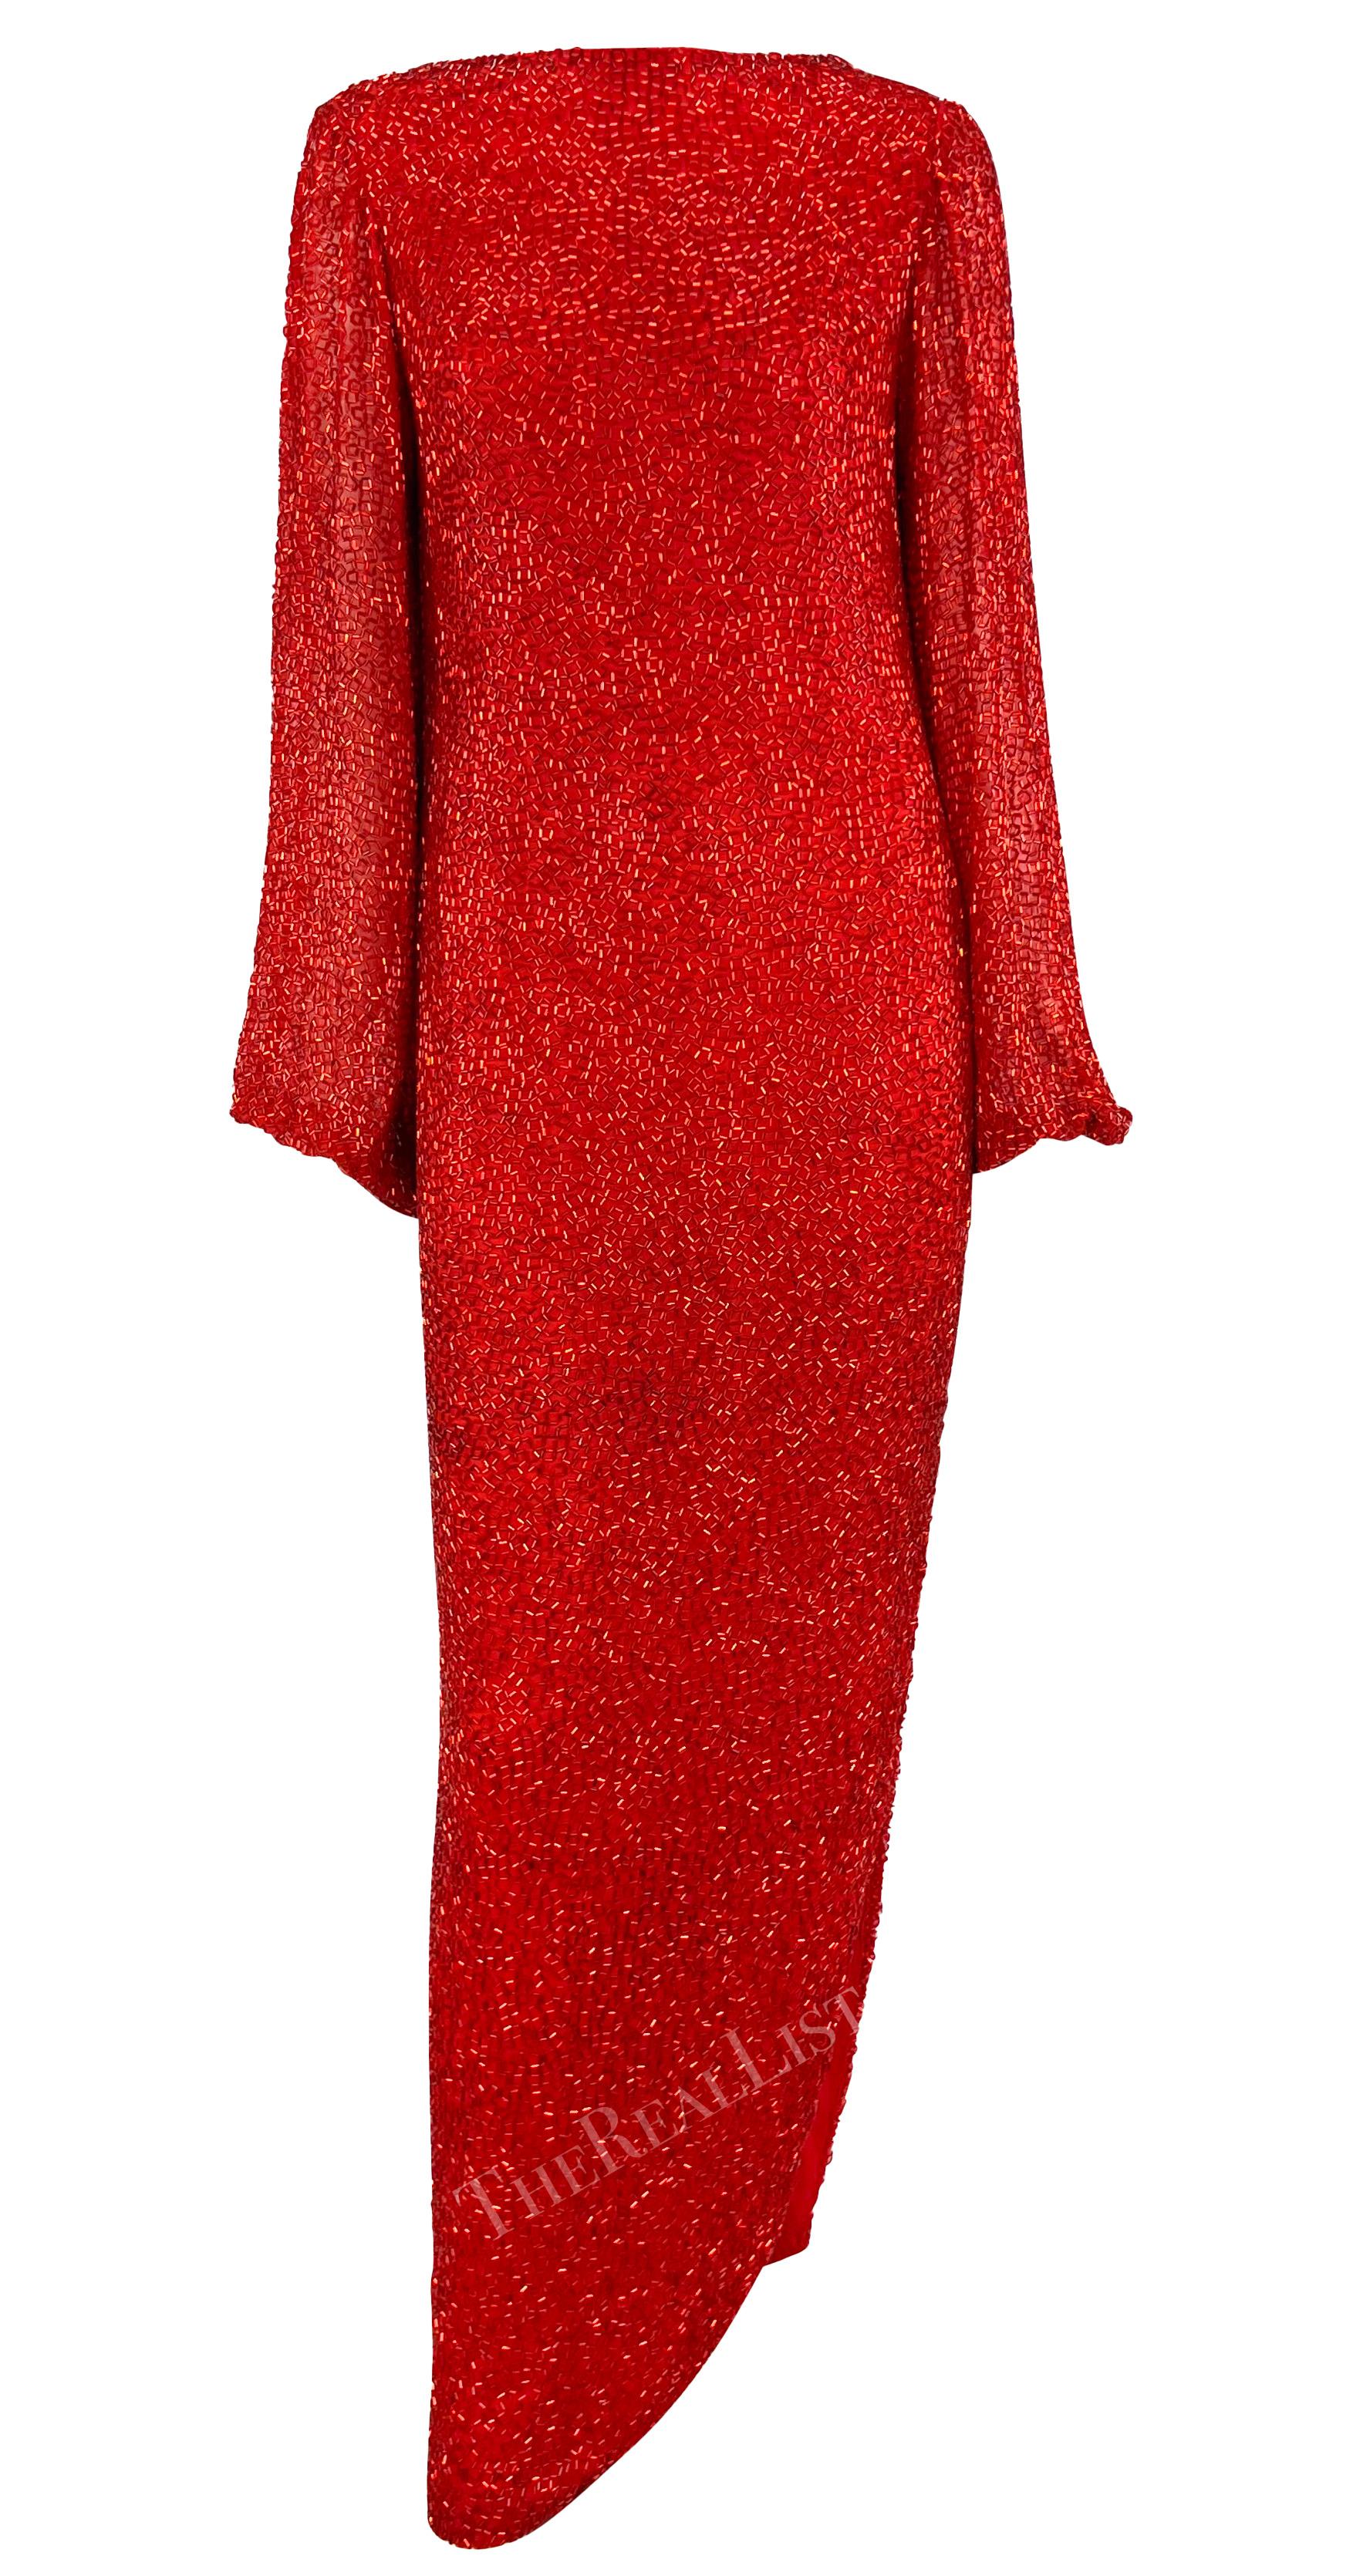 Women's Early 1980s Bob Mackie Heavily Beaded Cowl Back Red High-Slit Evening Gown For Sale